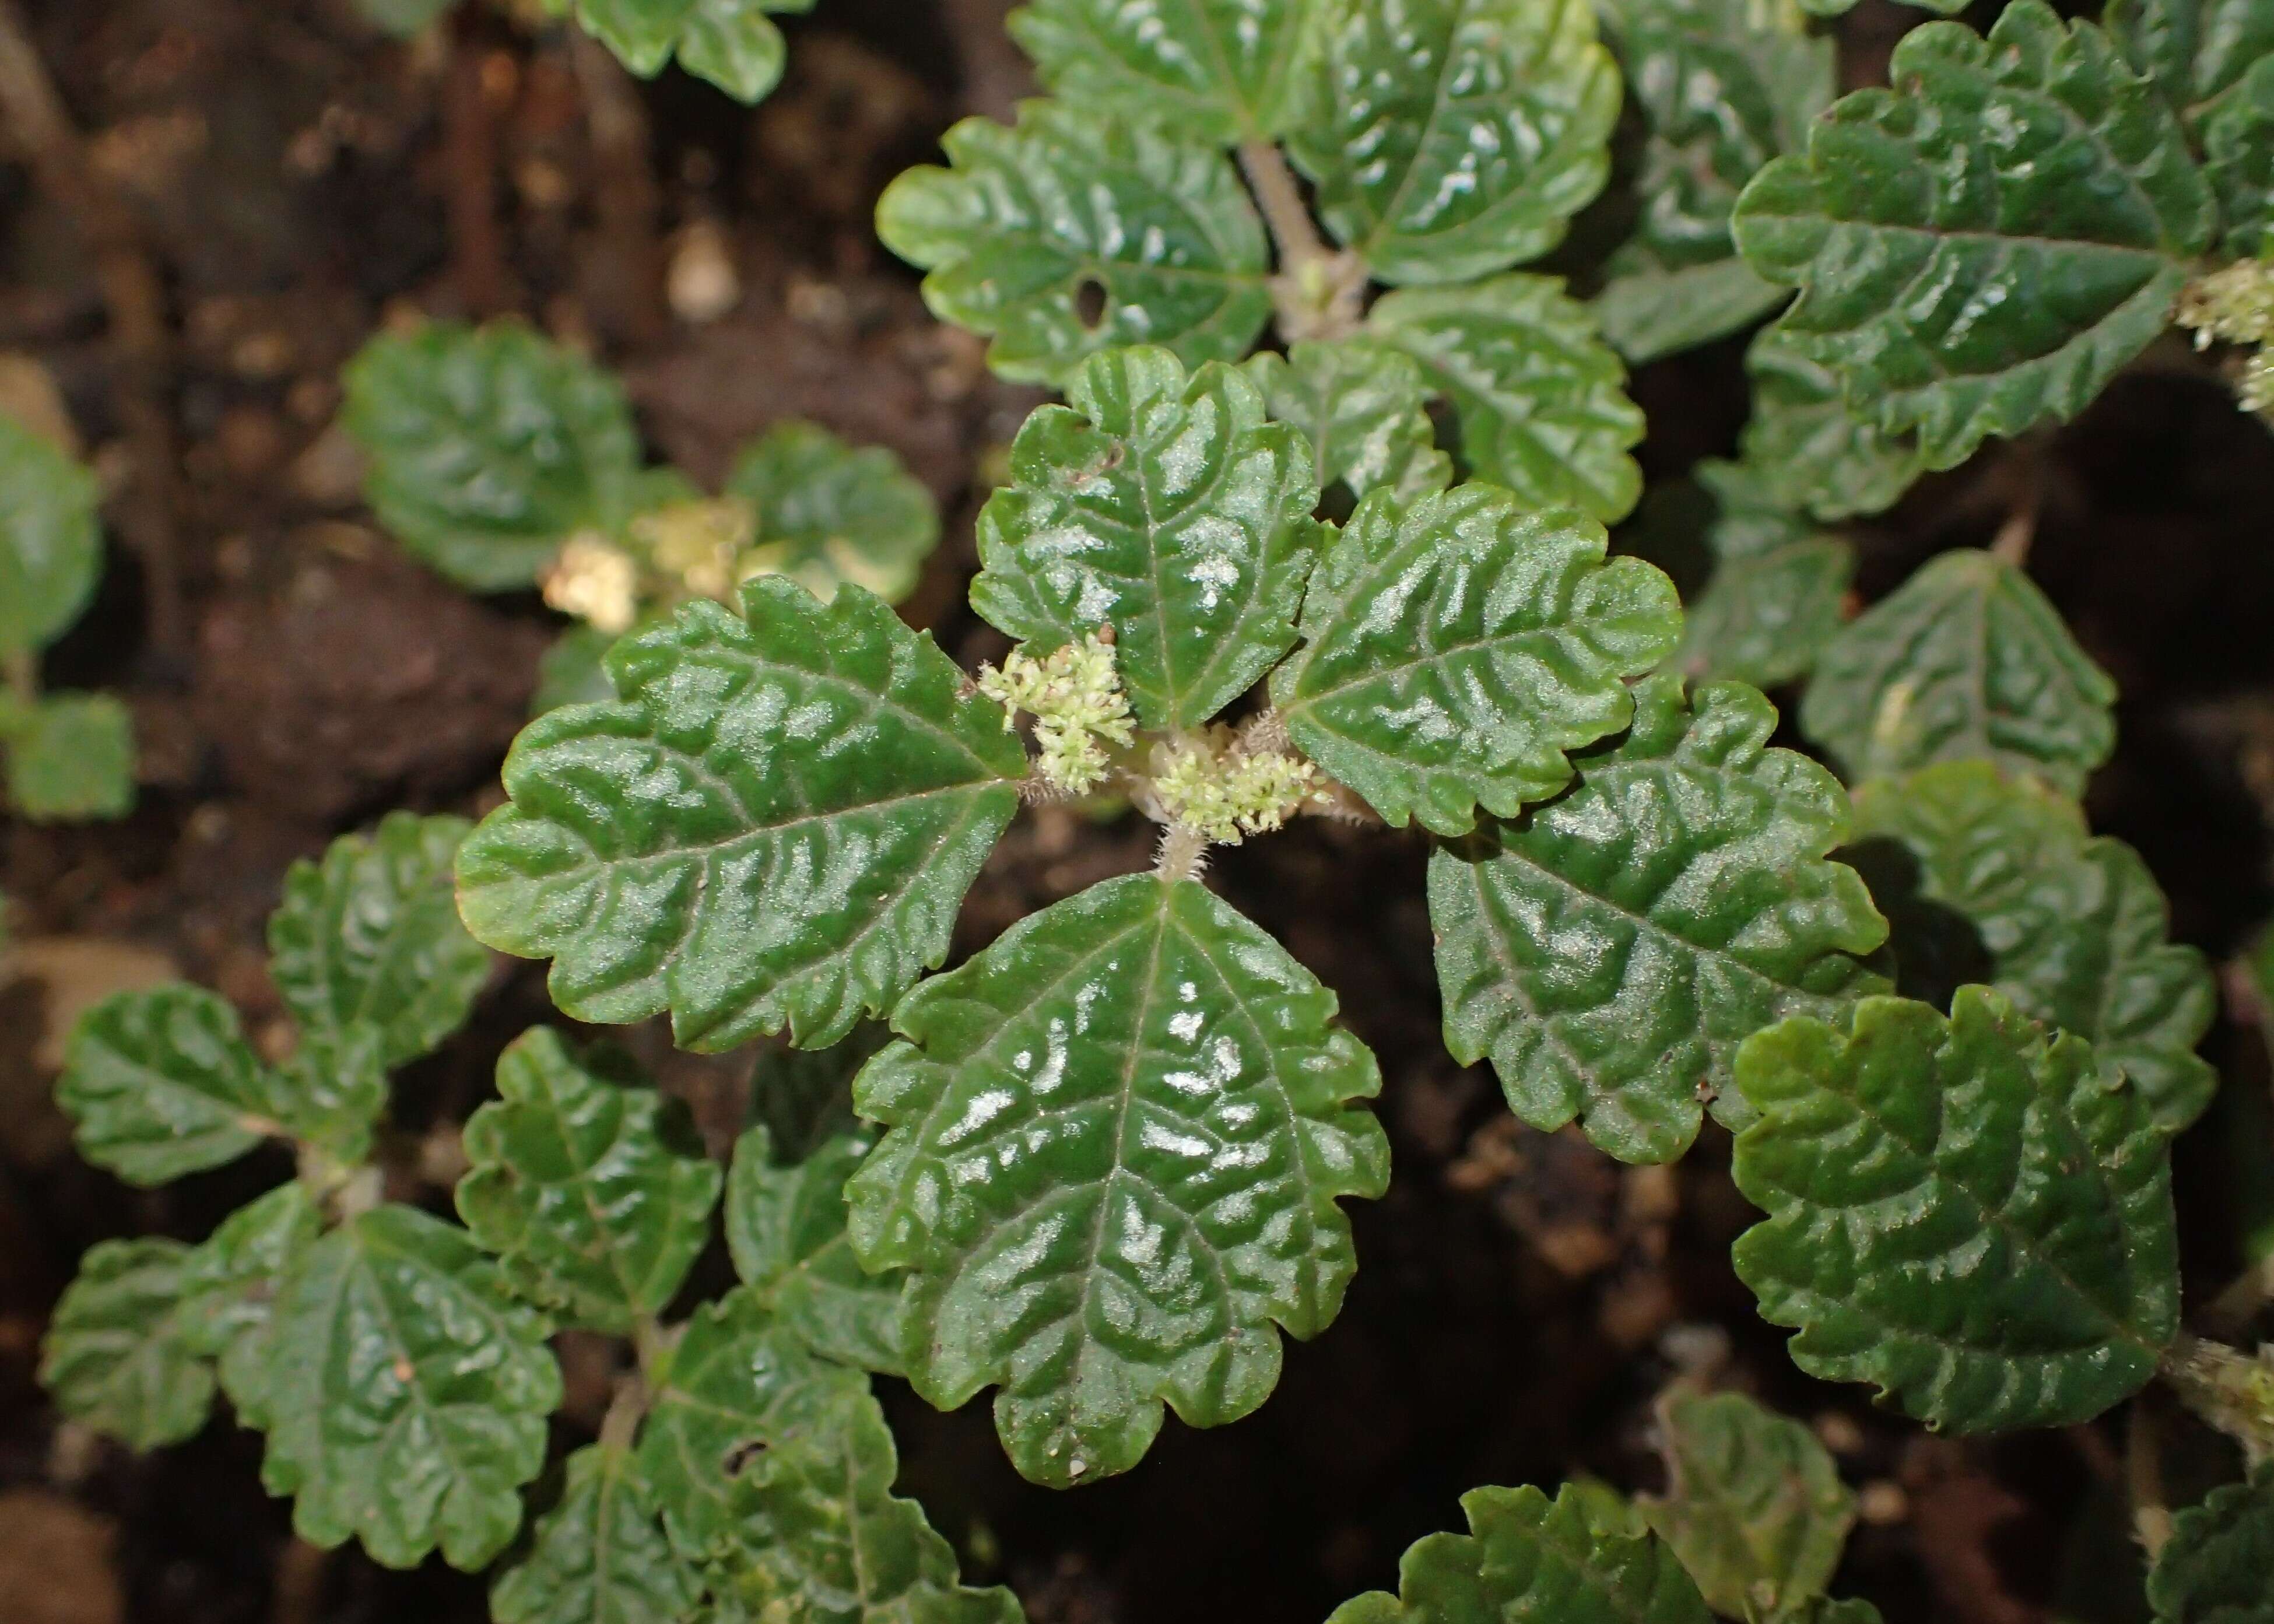 Image of West Indian Clearweed